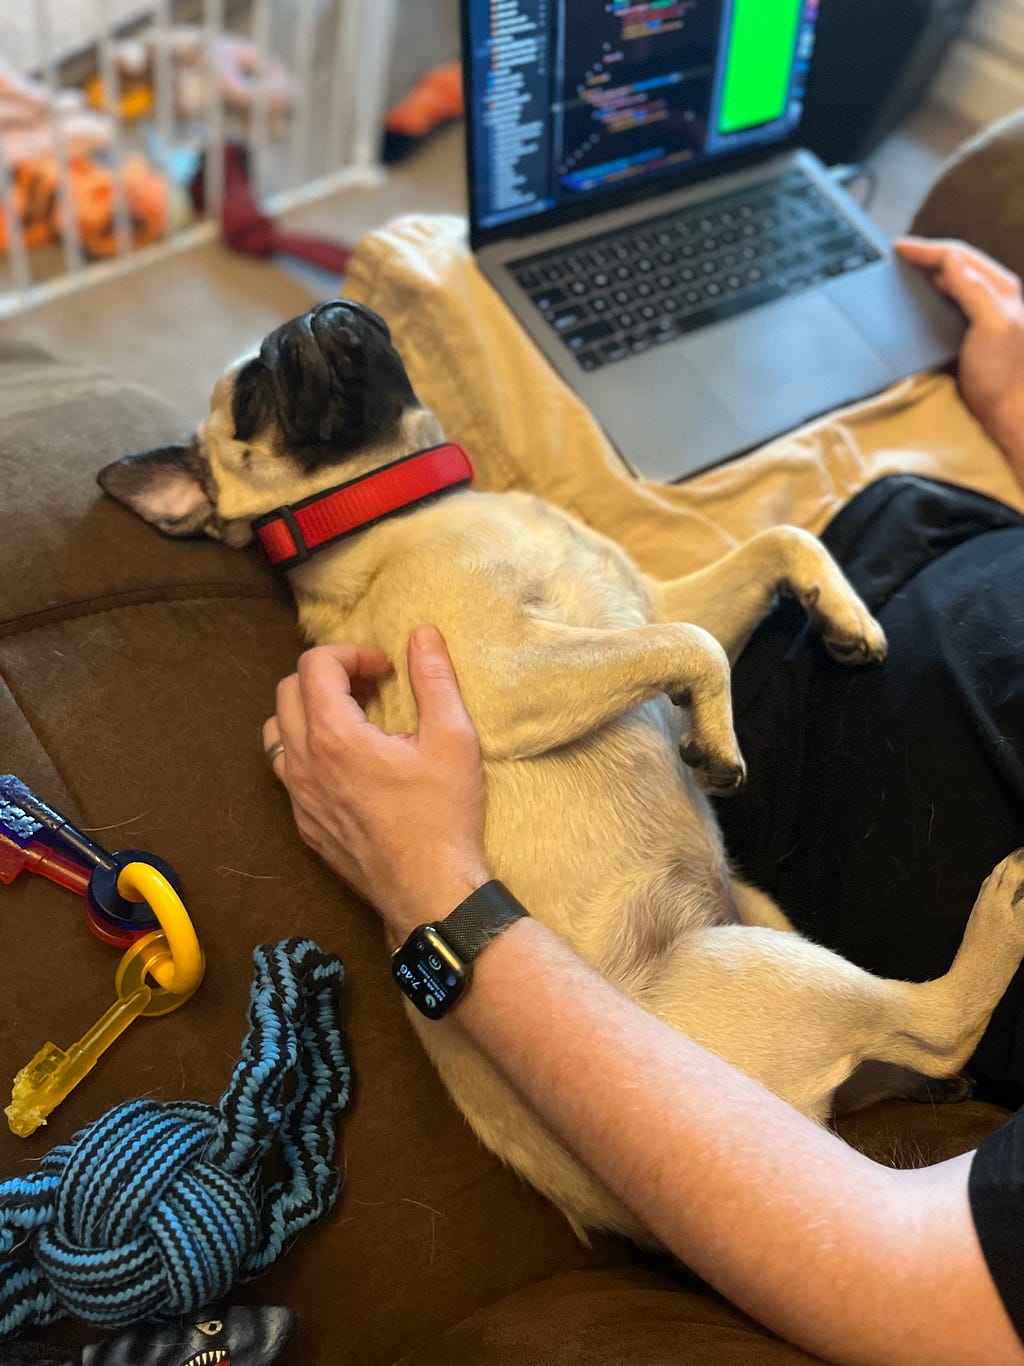 My pug Bucky is sleeping next to me while I work on a SwiftUI interface preview on my laptop.